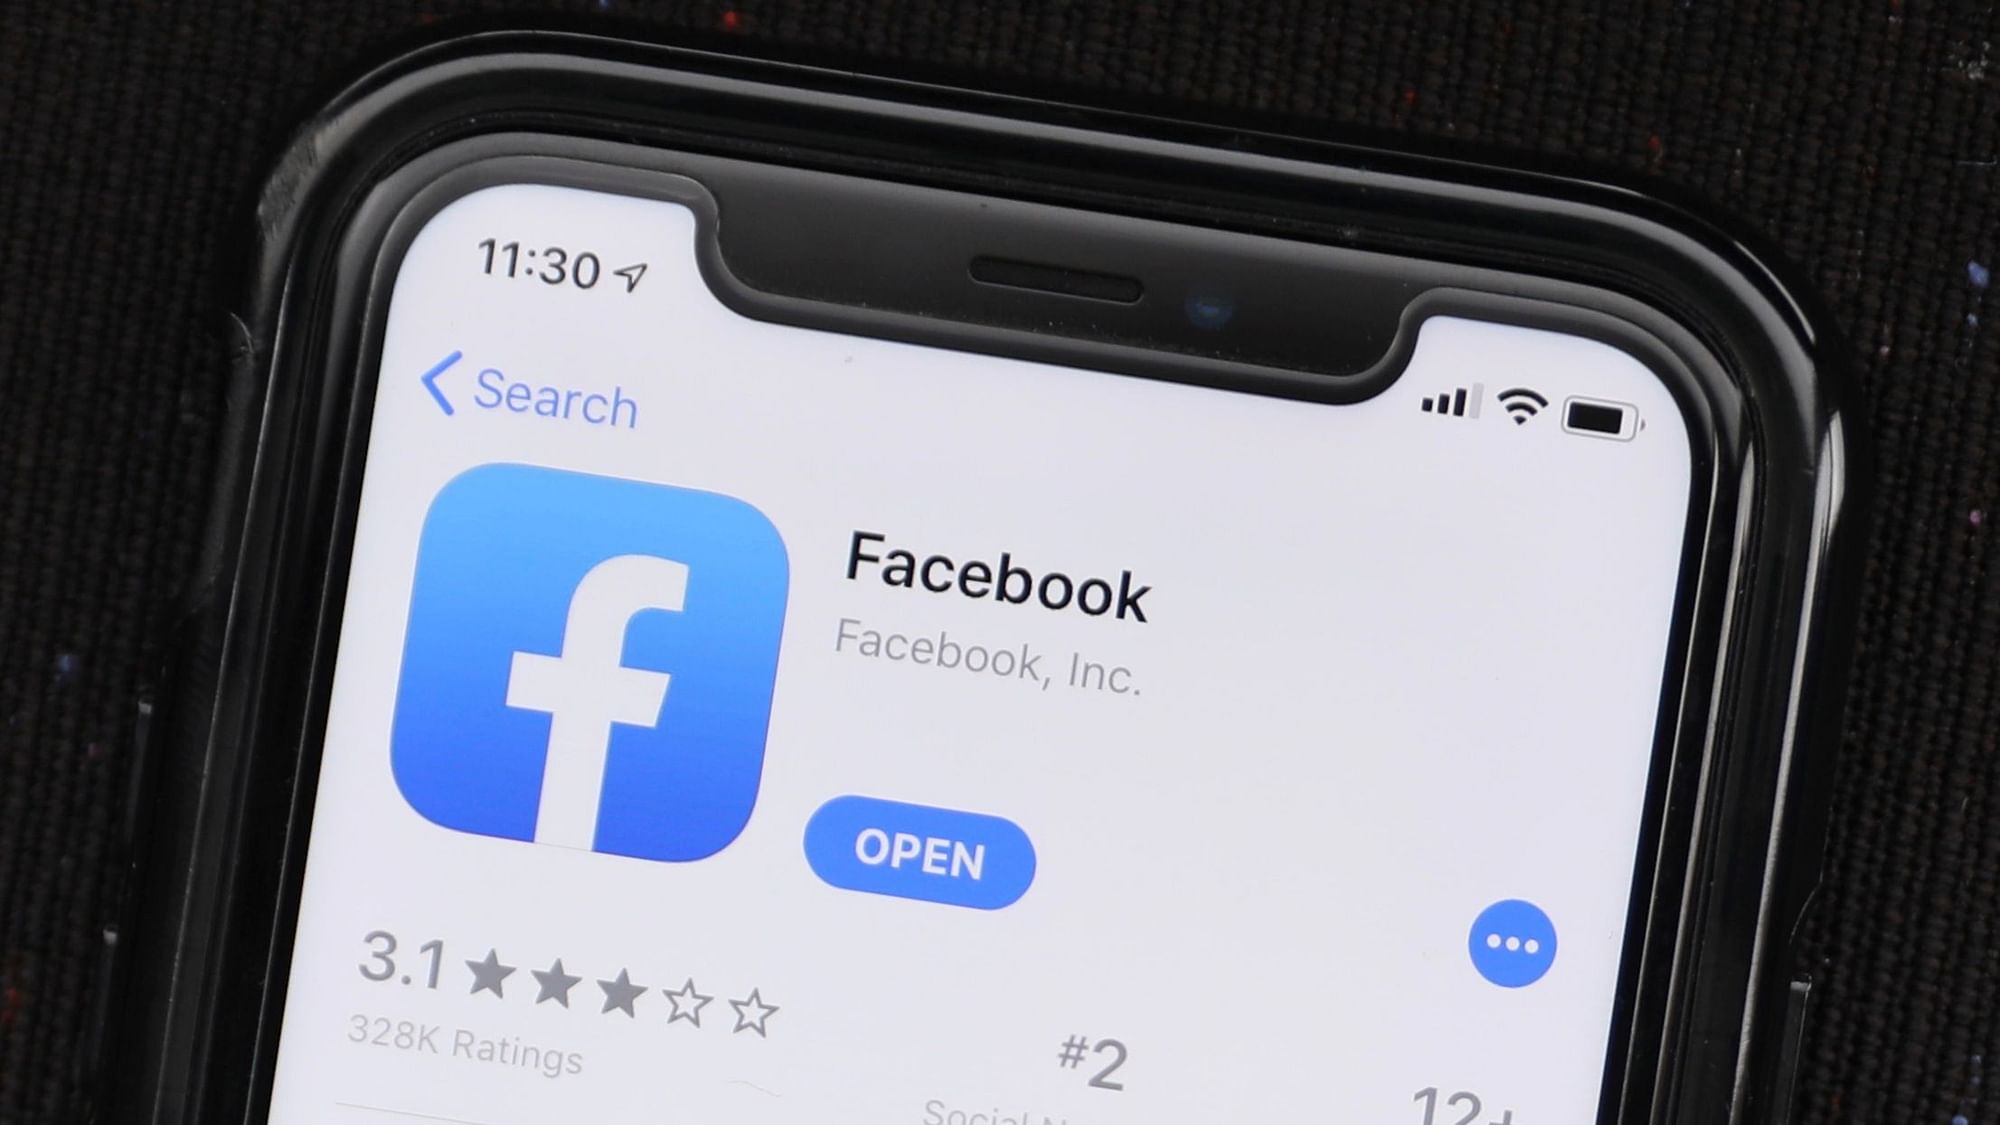 The new tool, called Off-Facebook, was rolled out to give users more control over their data that Facebook gathers from other websites.